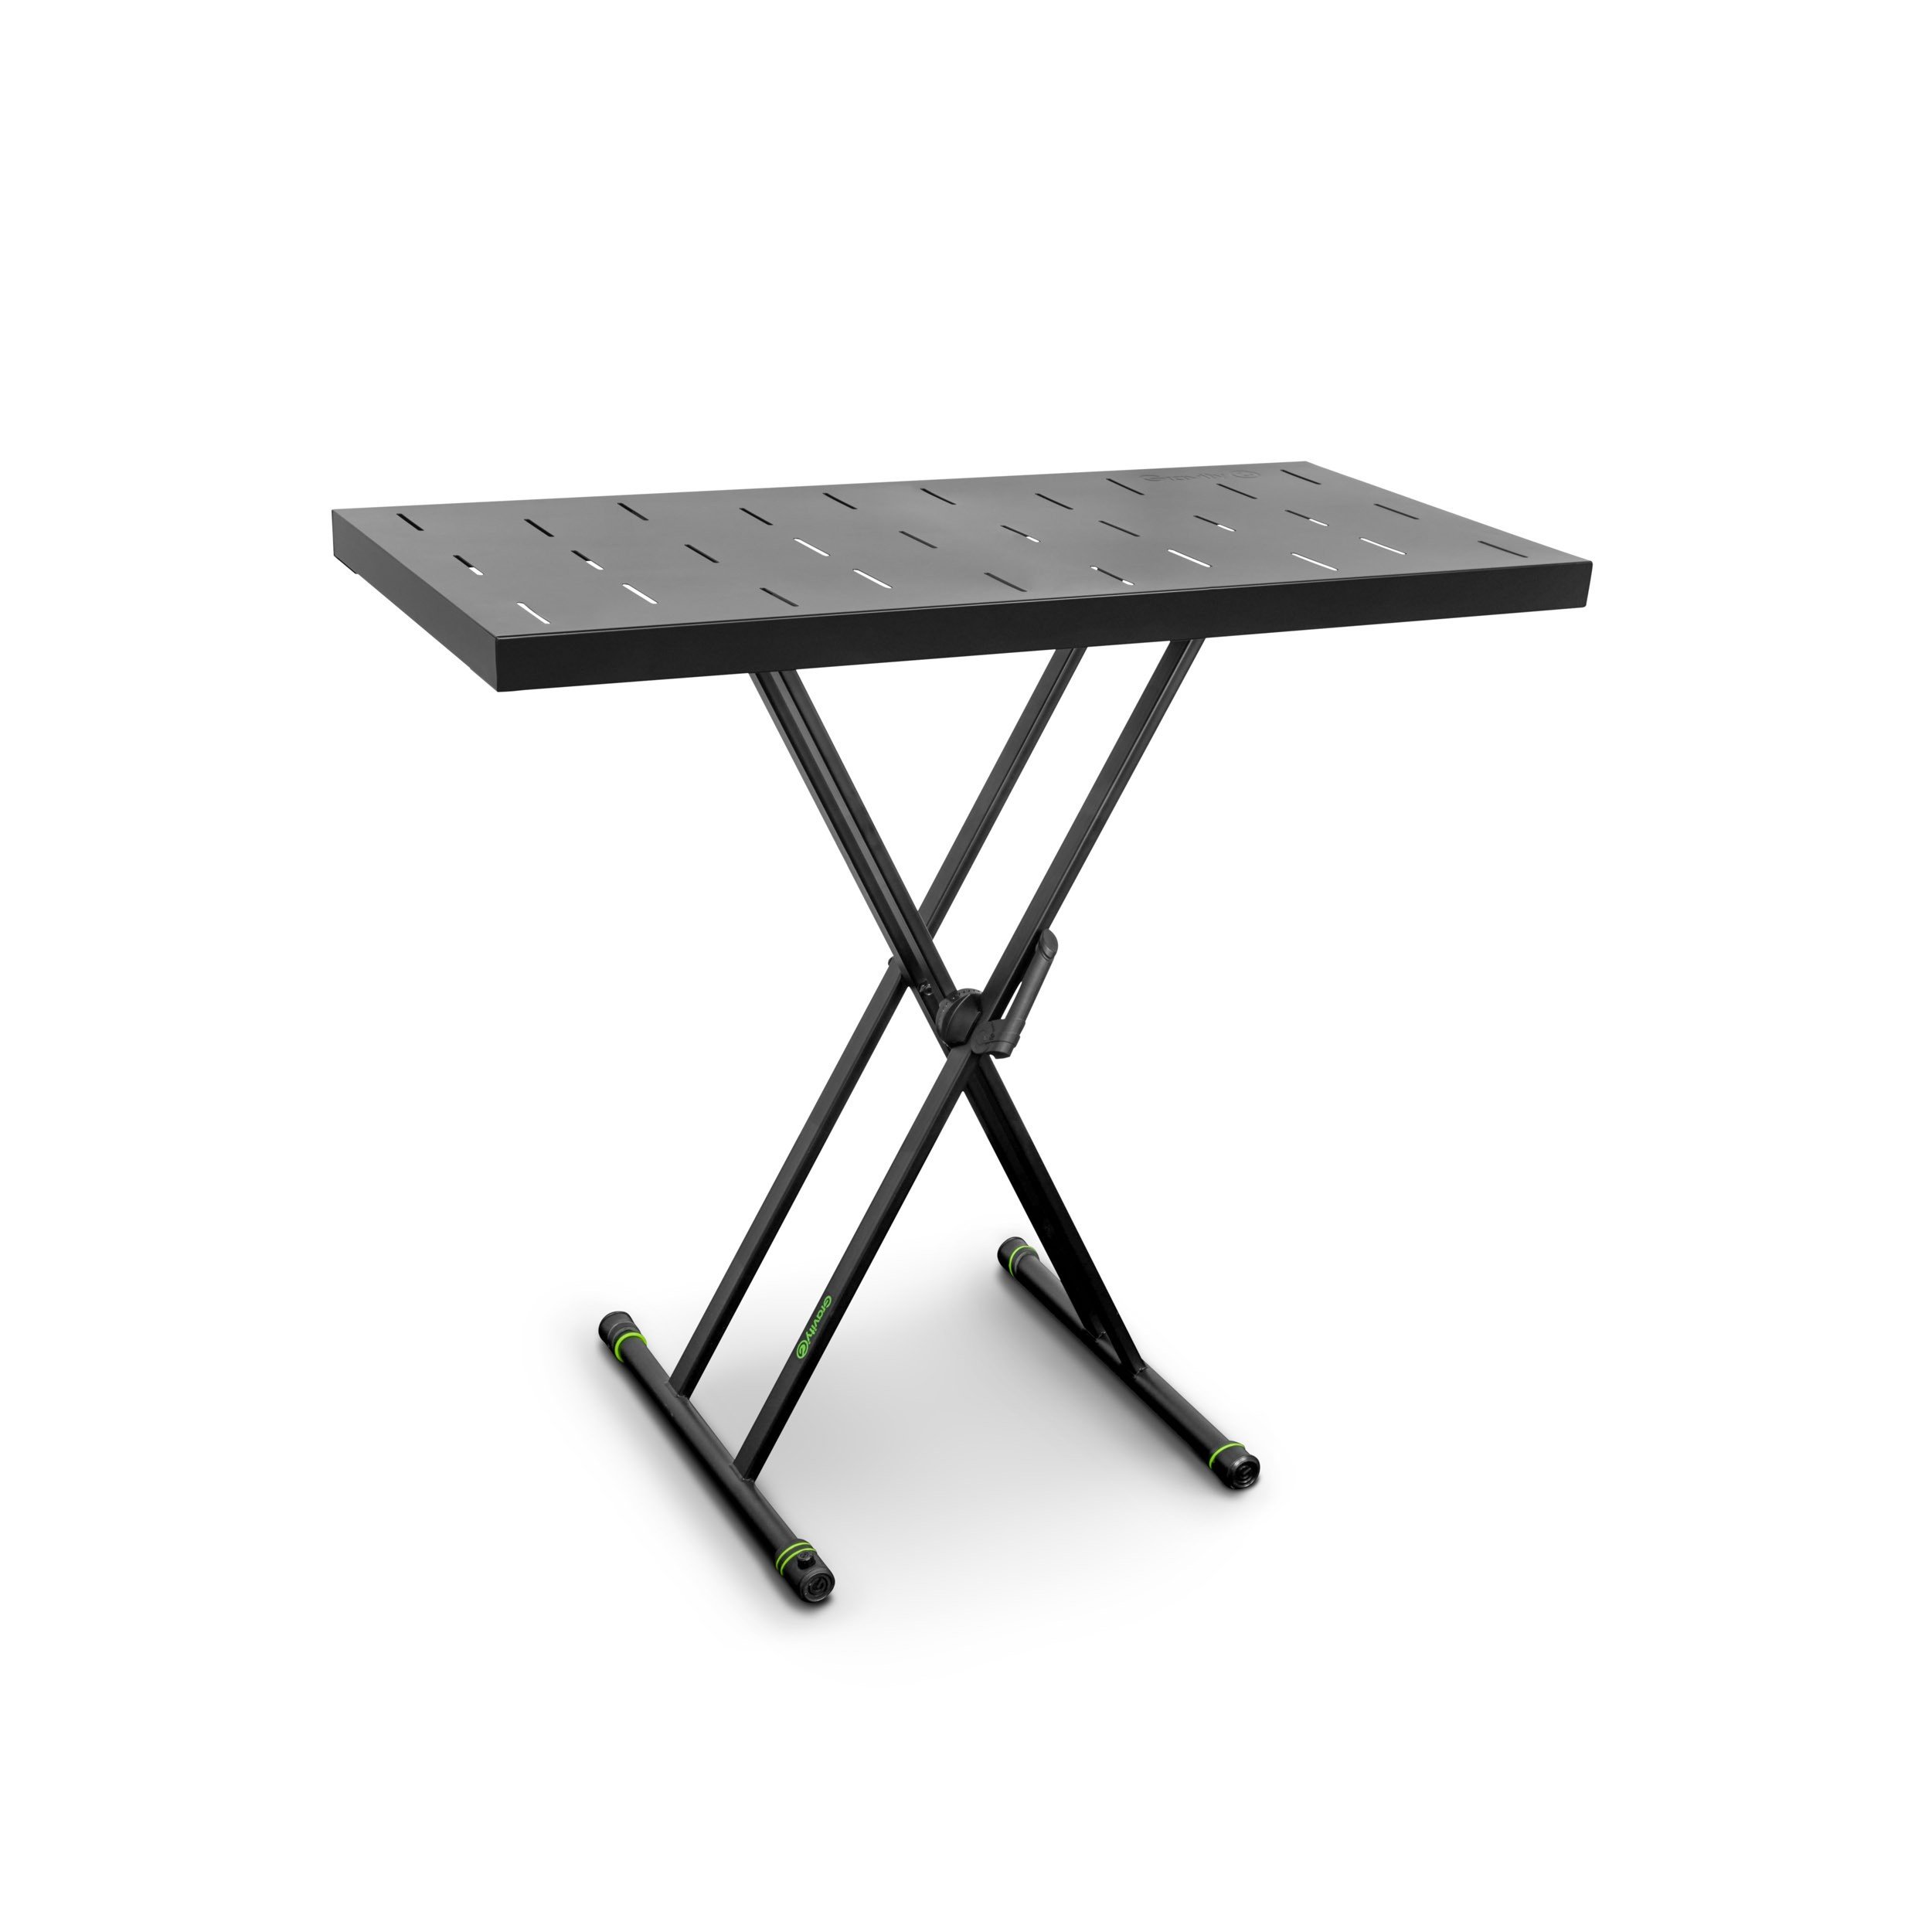 gravity-stands-ksx-2-rd--keyboard-stand-x-form-double-and-rapid-desk.jpeg